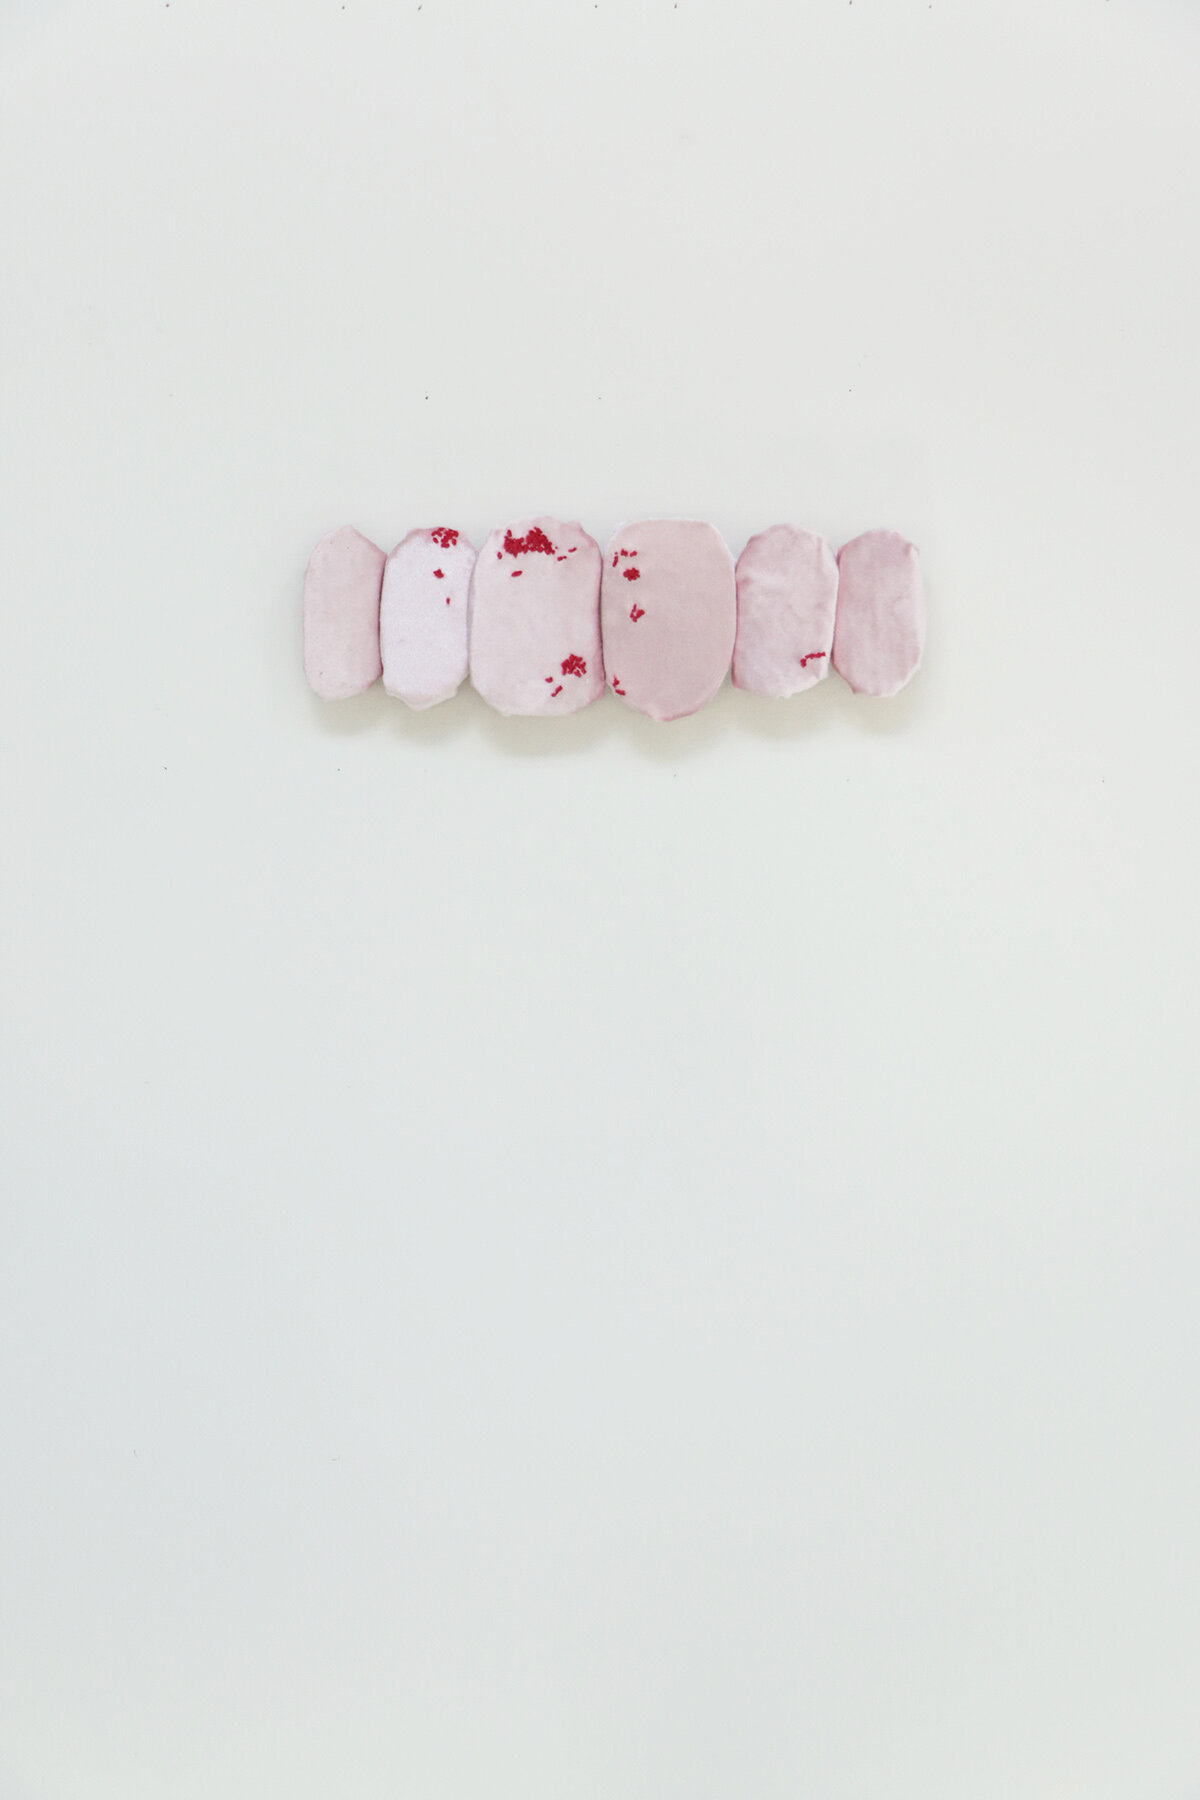 Untitled (lipstick on teeth during a date) 